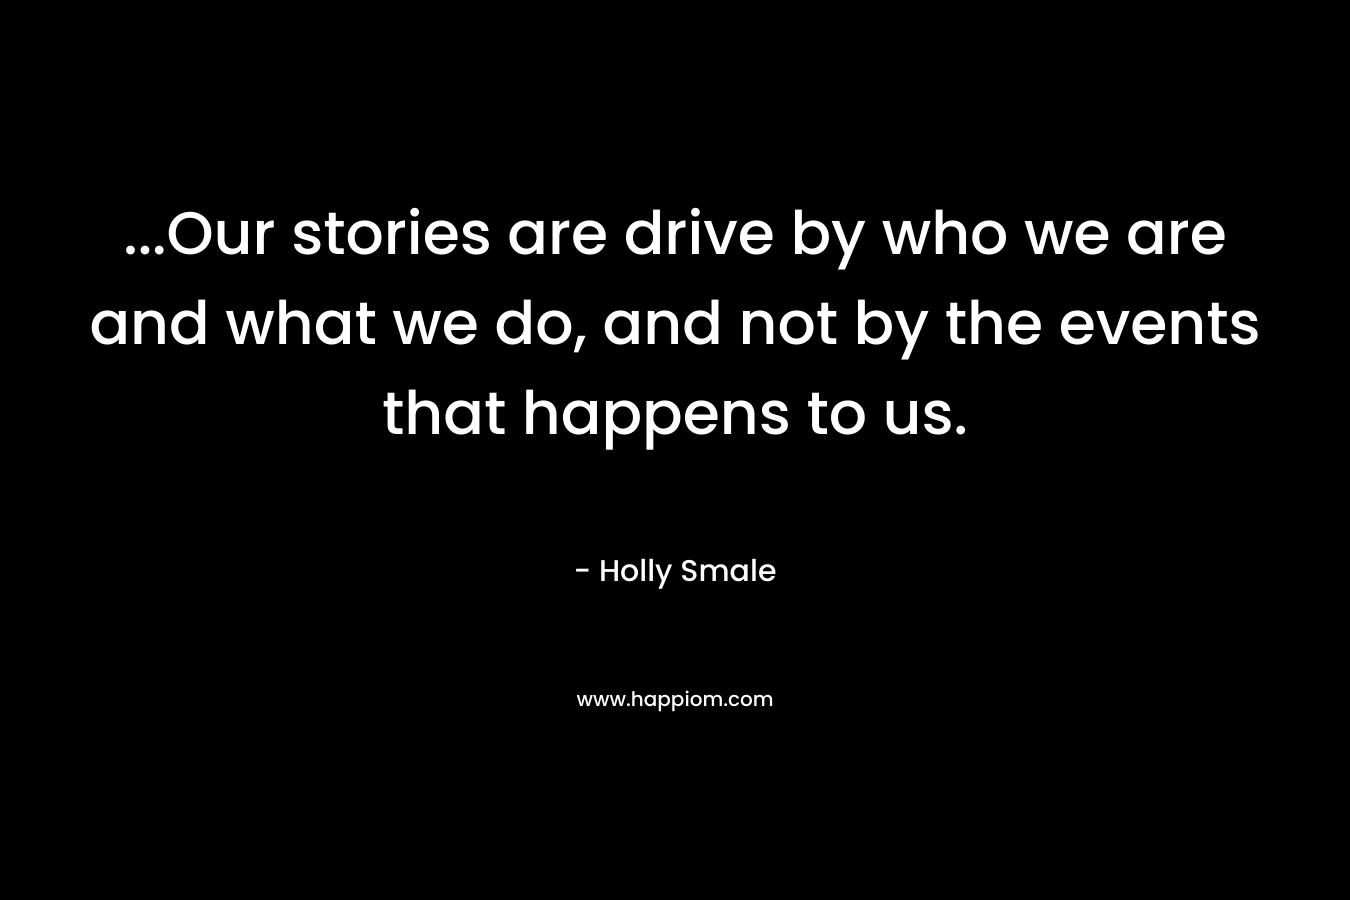 …Our stories are drive by who we are and what we do, and not by the events that happens to us. – Holly Smale